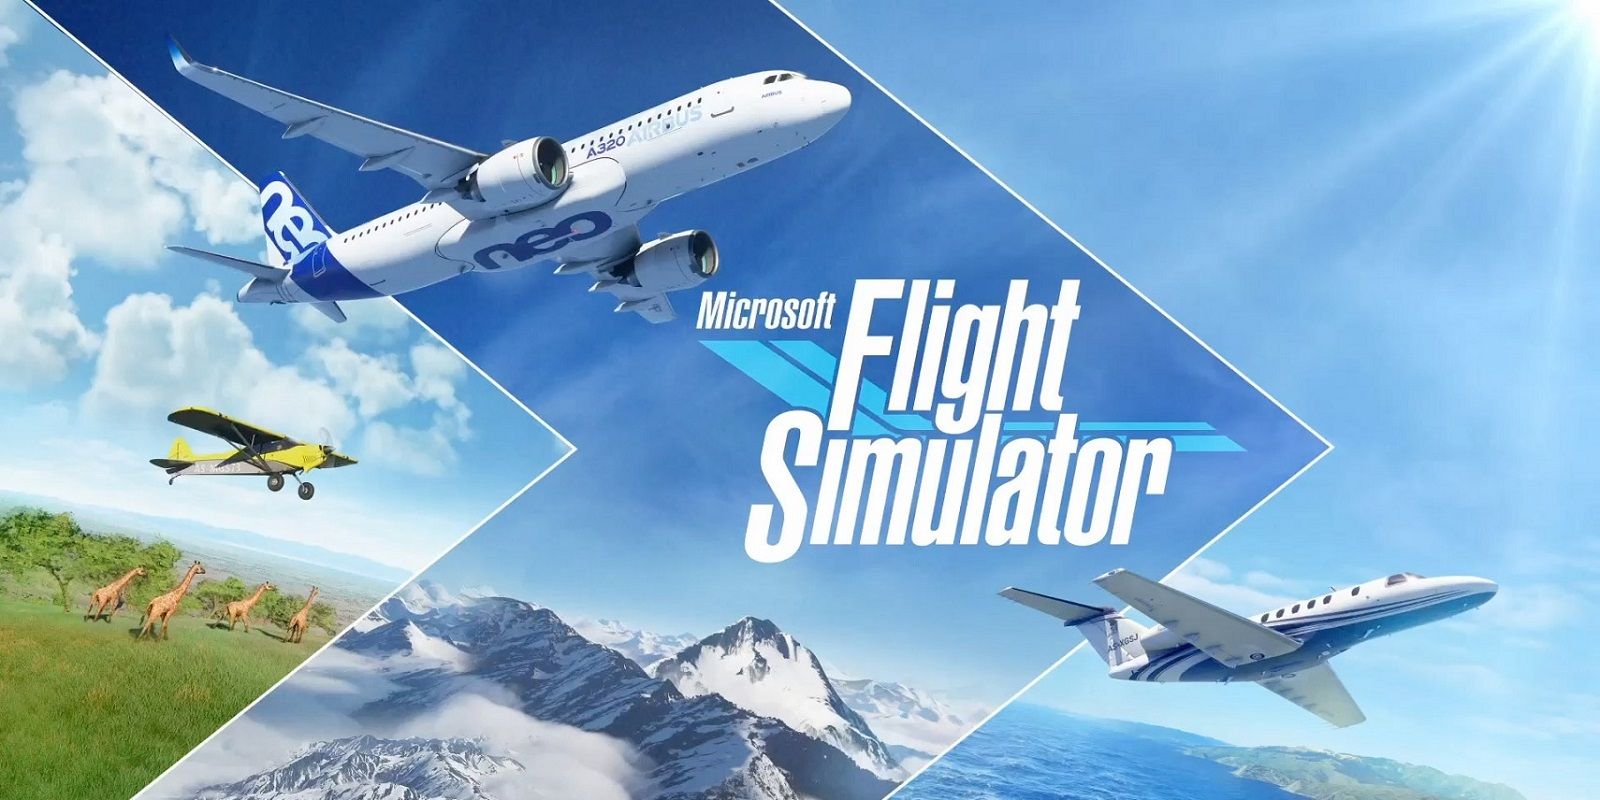 10 amazing things we've learned about Microsoft Flight Simulator